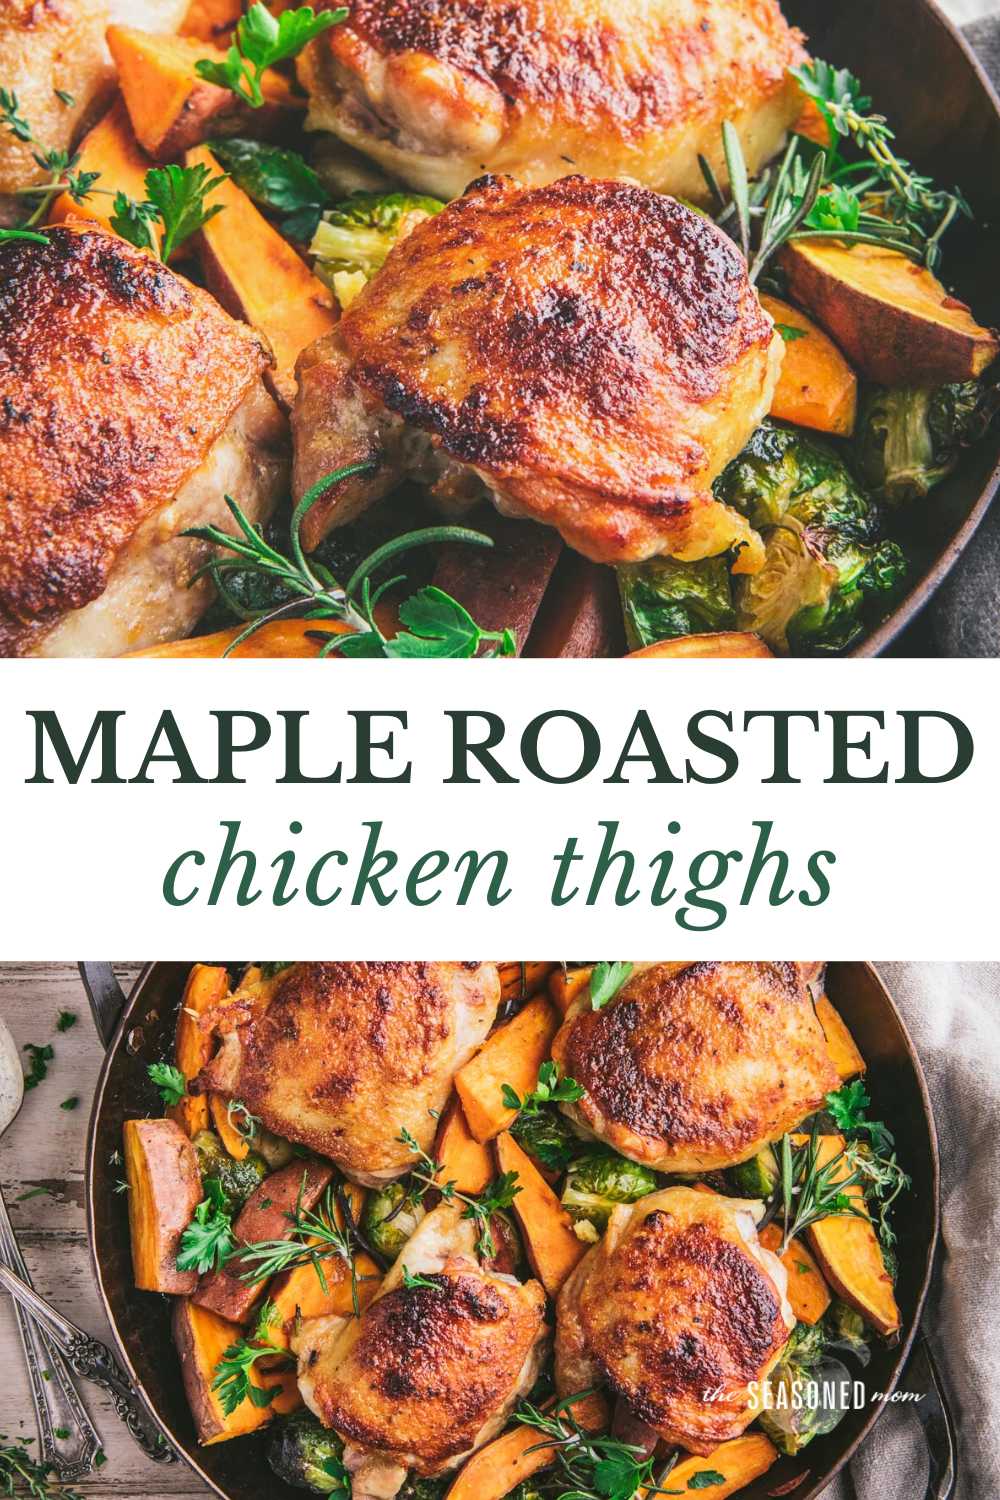 Maple Roasted Chicken Thighs with Veggies - The Seasoned Mom